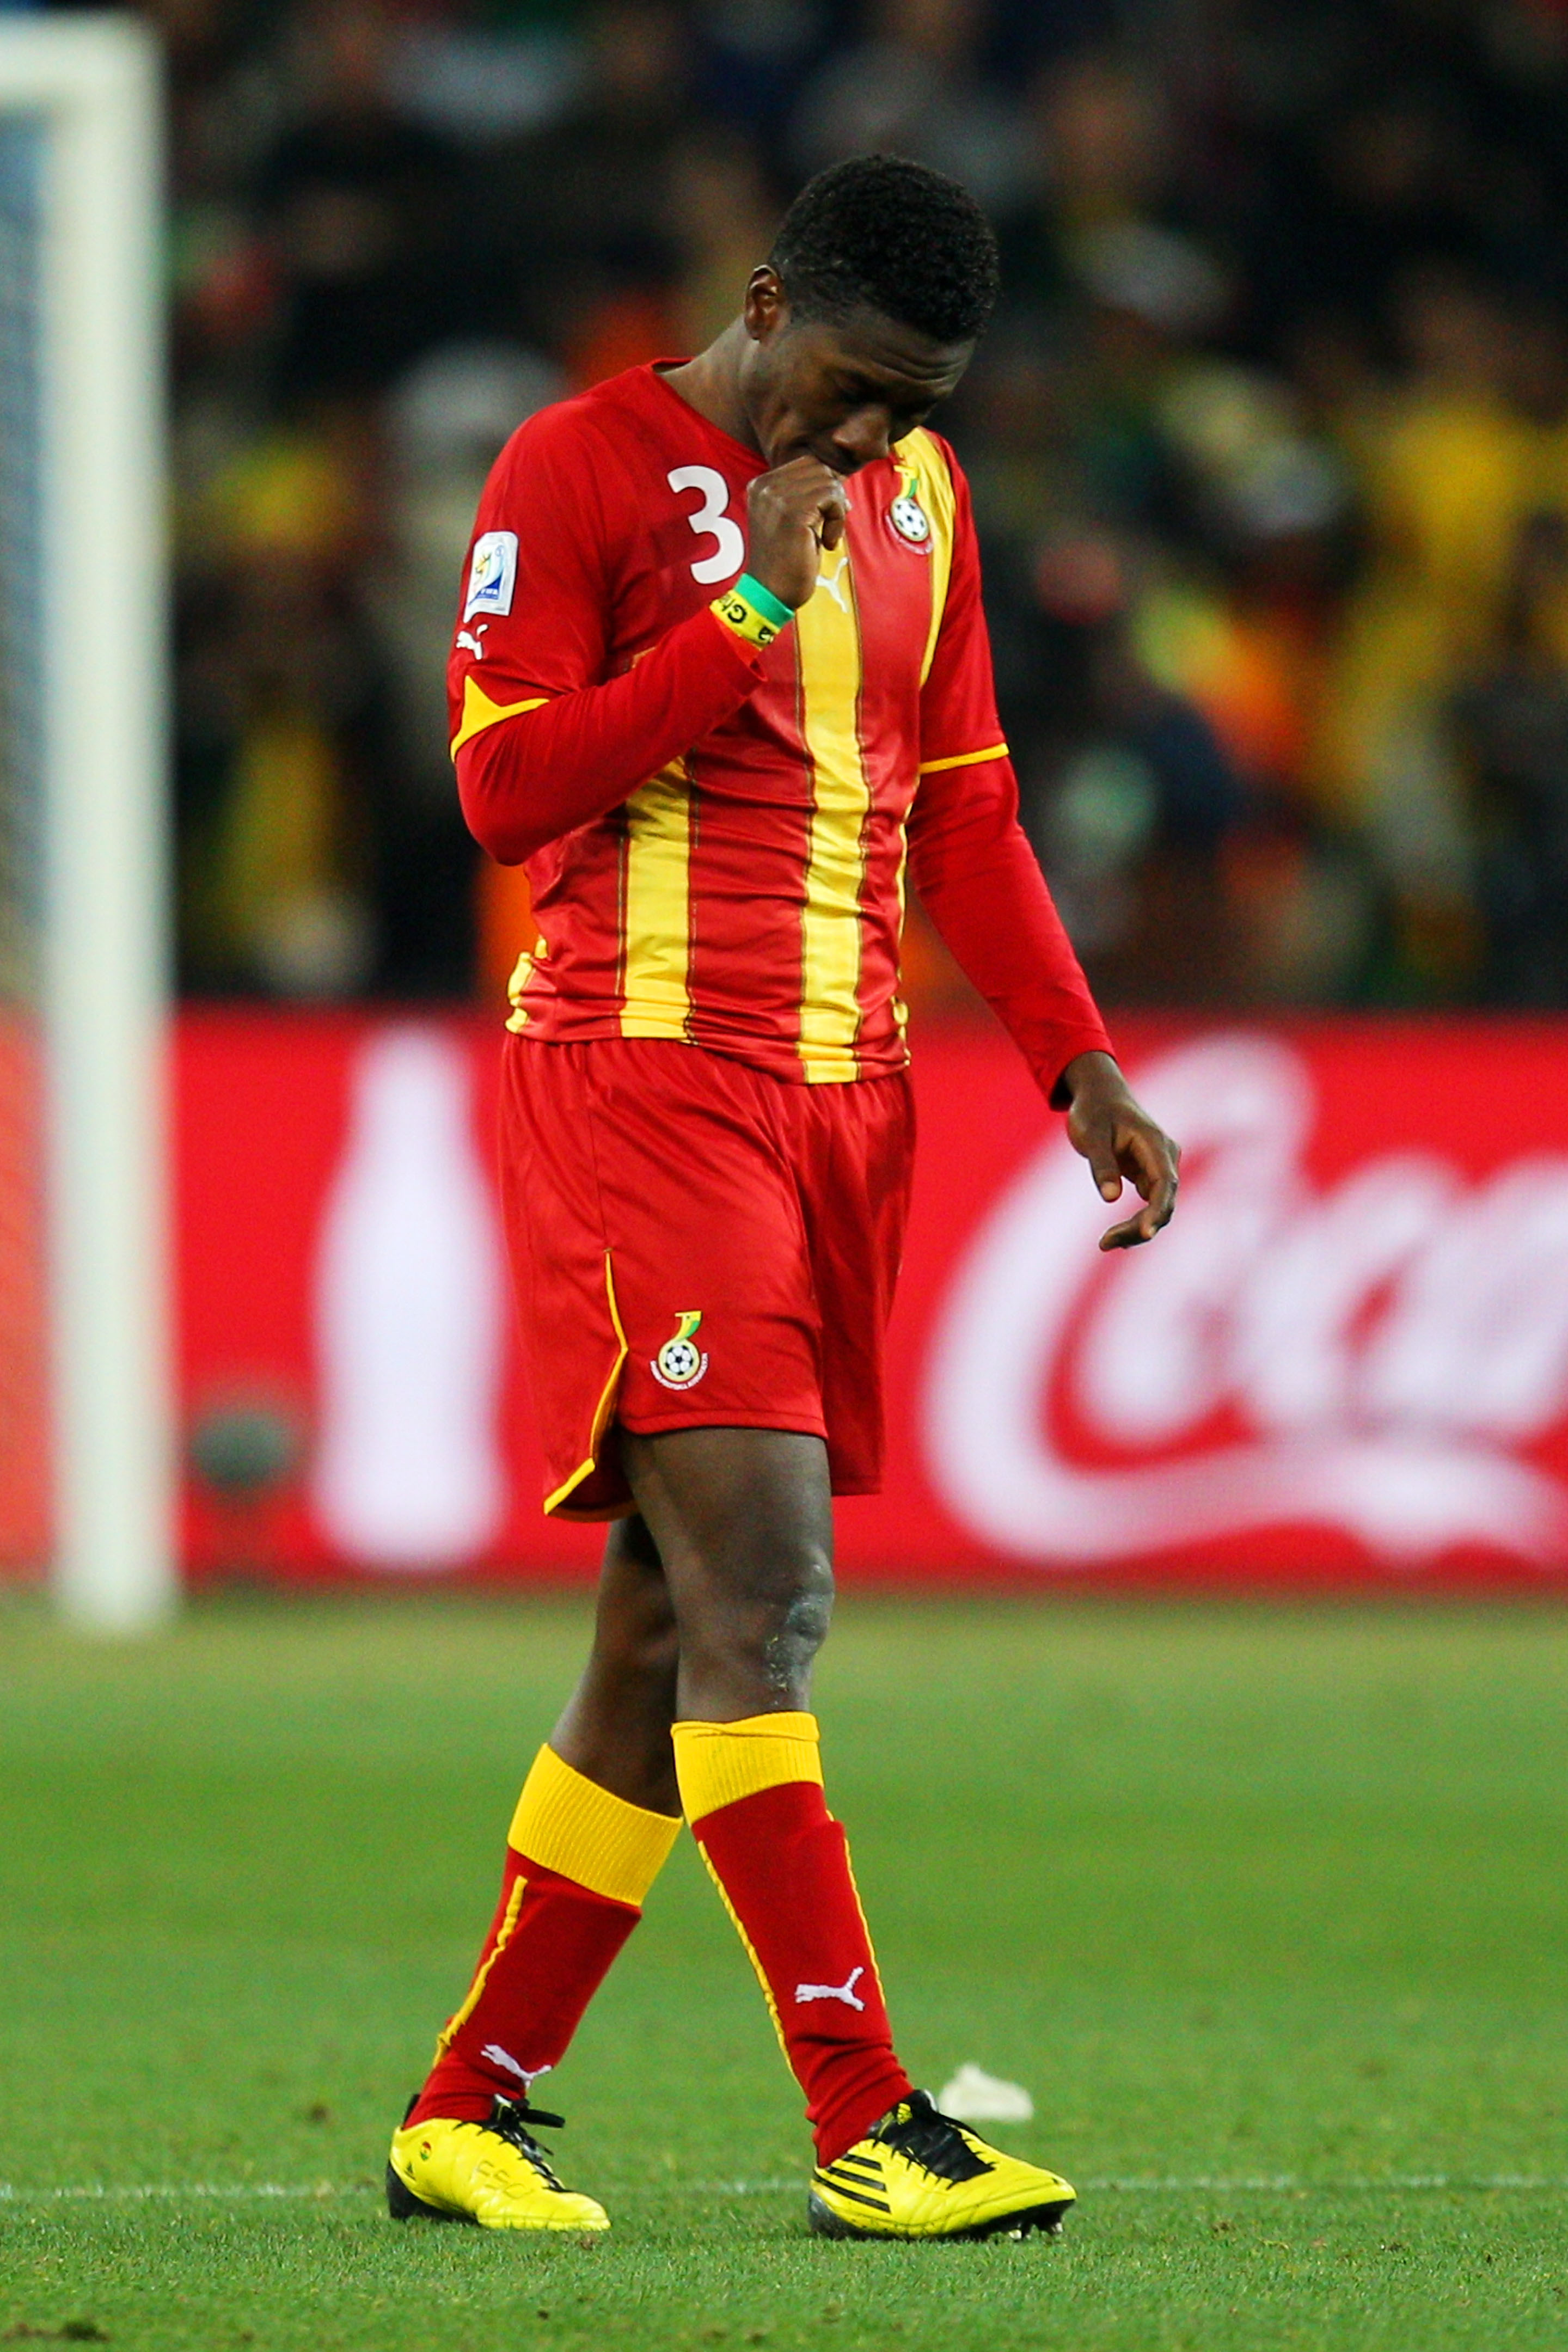 JOHANNESBURG, SOUTH AFRICA - JULY 02: Asamoah Gyan of Ghana looks dejected after the 2010 FIFA World Cup South Africa Quarter Final match between Uruguay and Ghana at the Soccer City stadium on July 2, 2010 in Johannesburg, South Africa.  (Photo by Camero